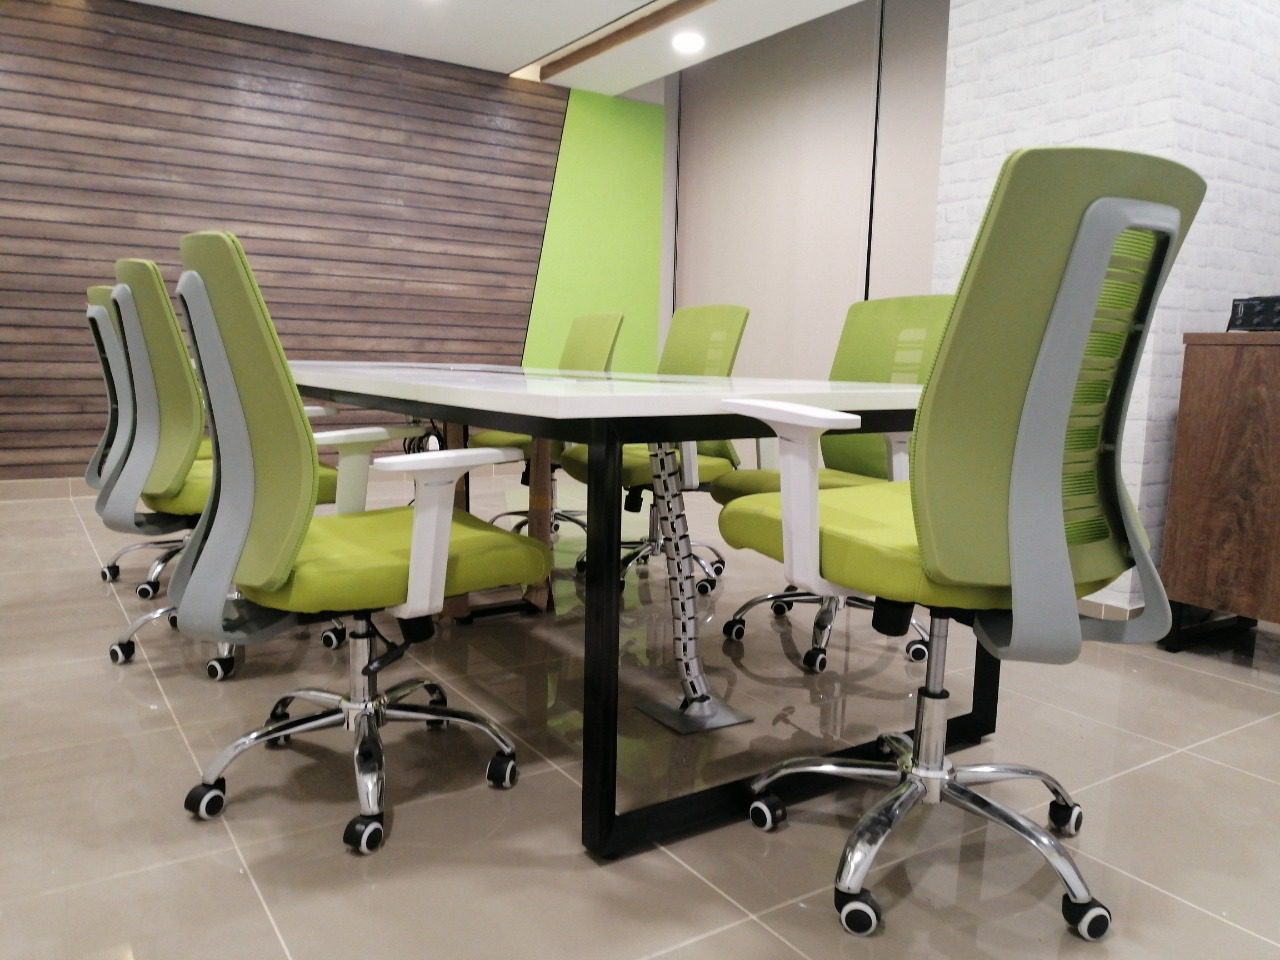 Budget is of the utmost importance for office furniture